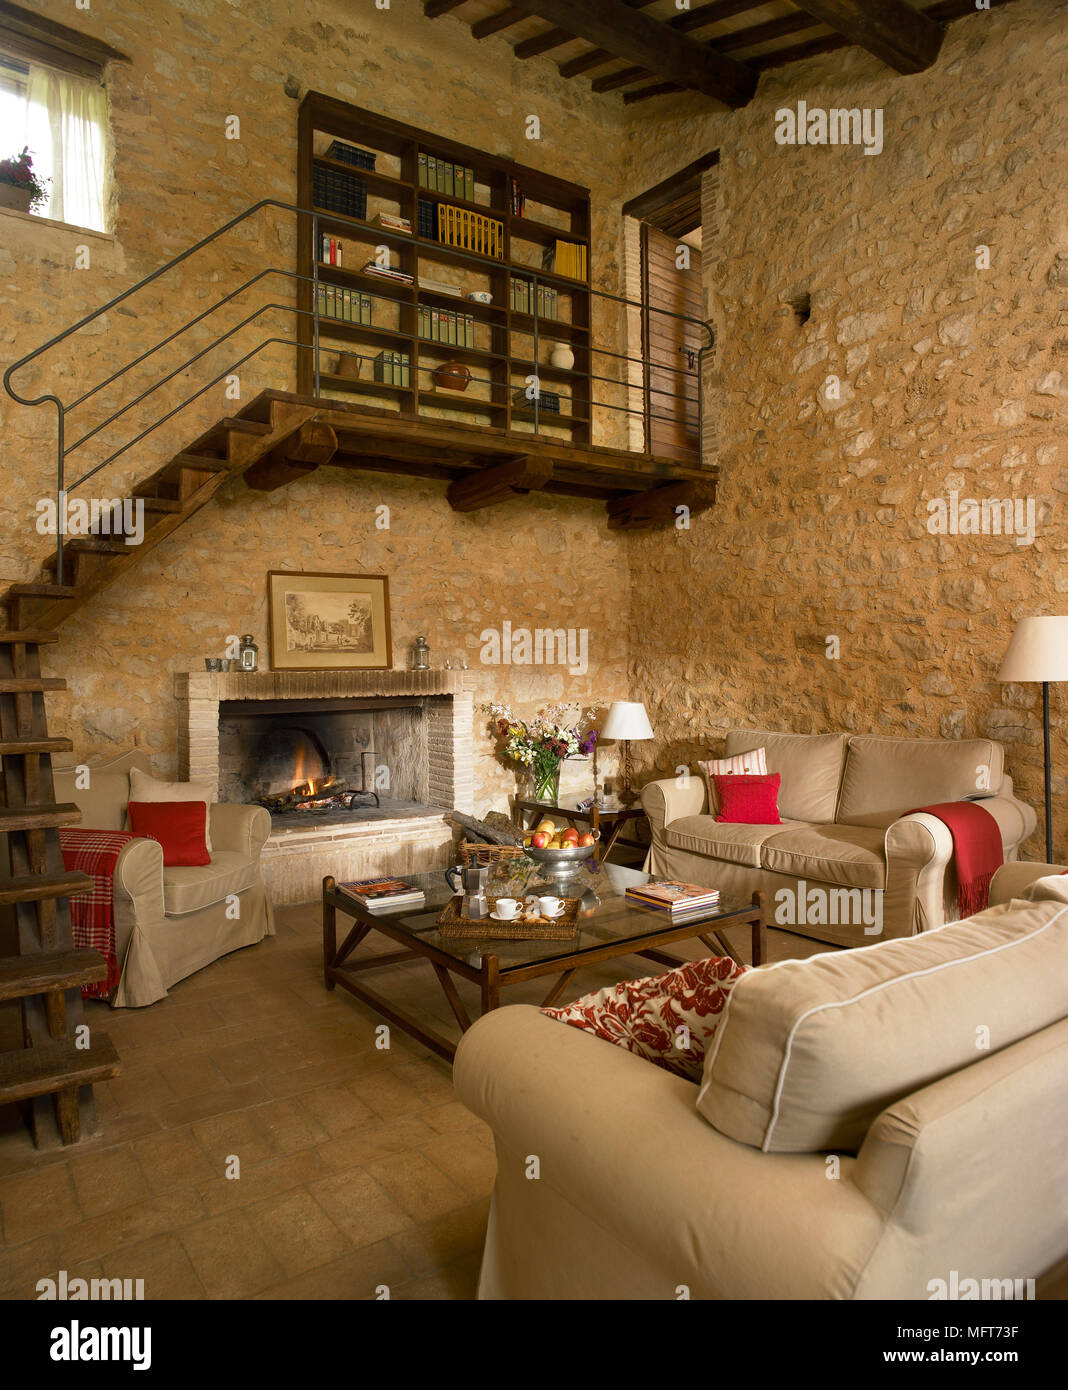 A Country Sitting Room With Rustic Stone Fireplace And